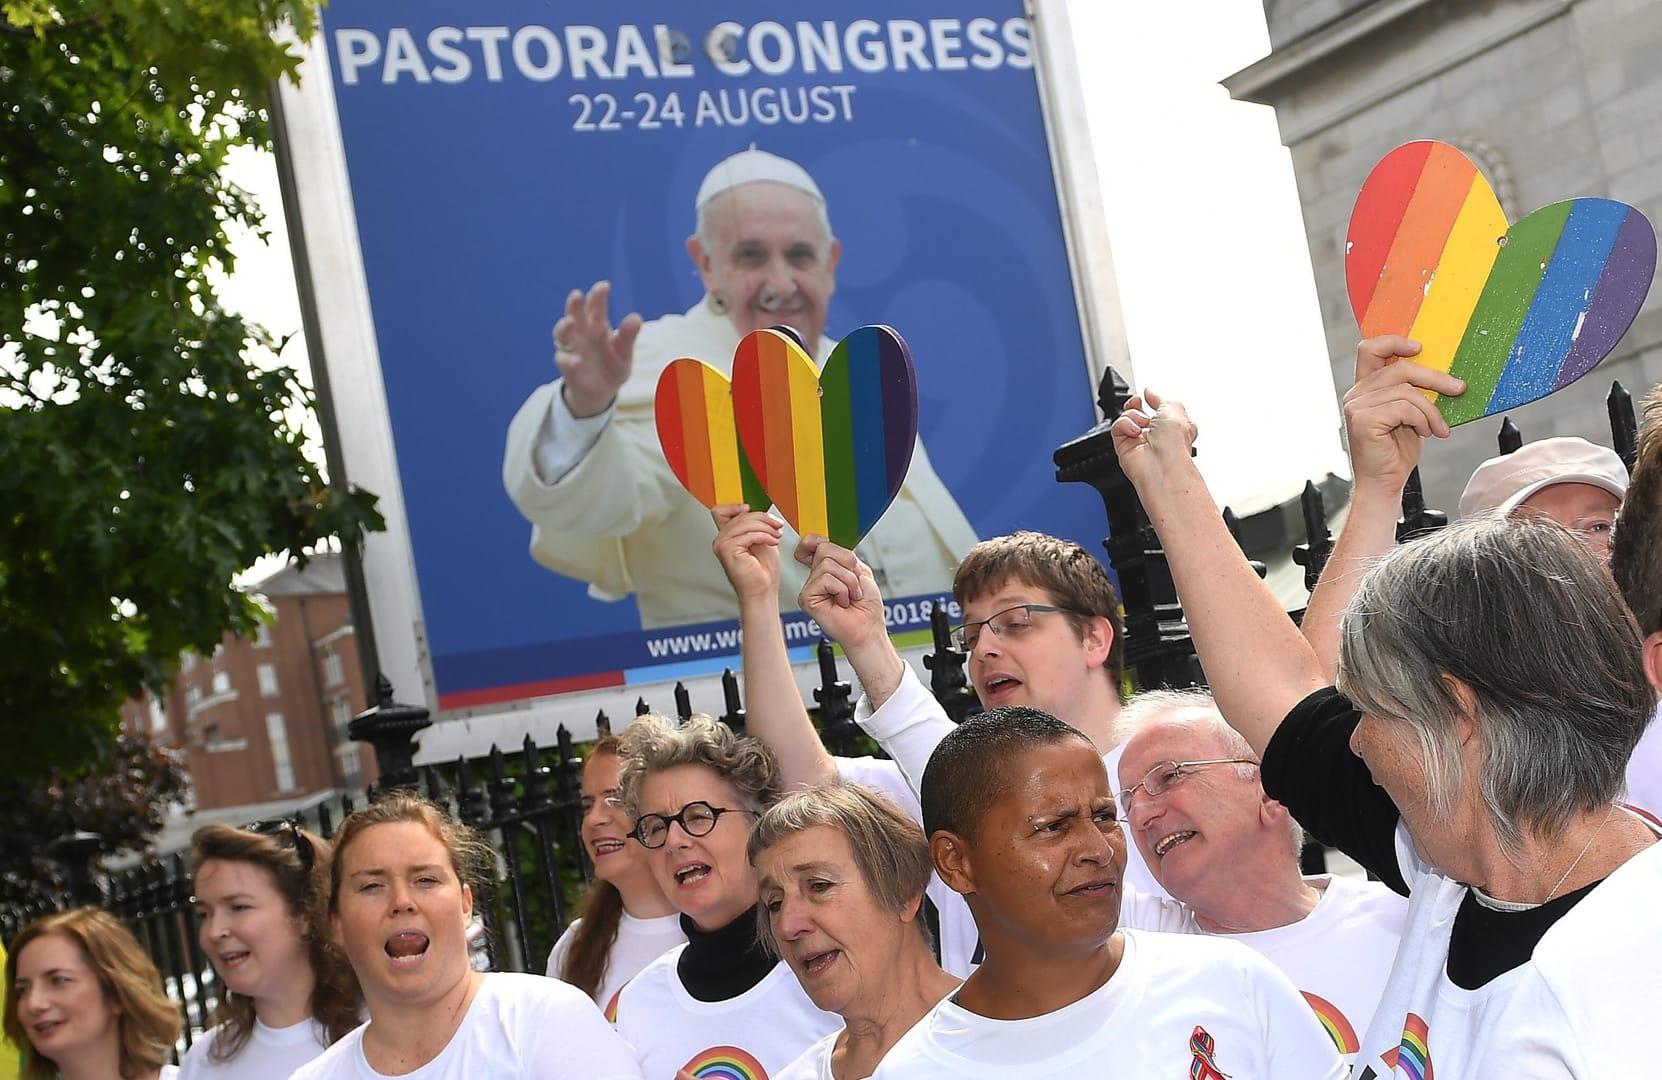 German Catholics plan huge blessing of gay unions on May 10